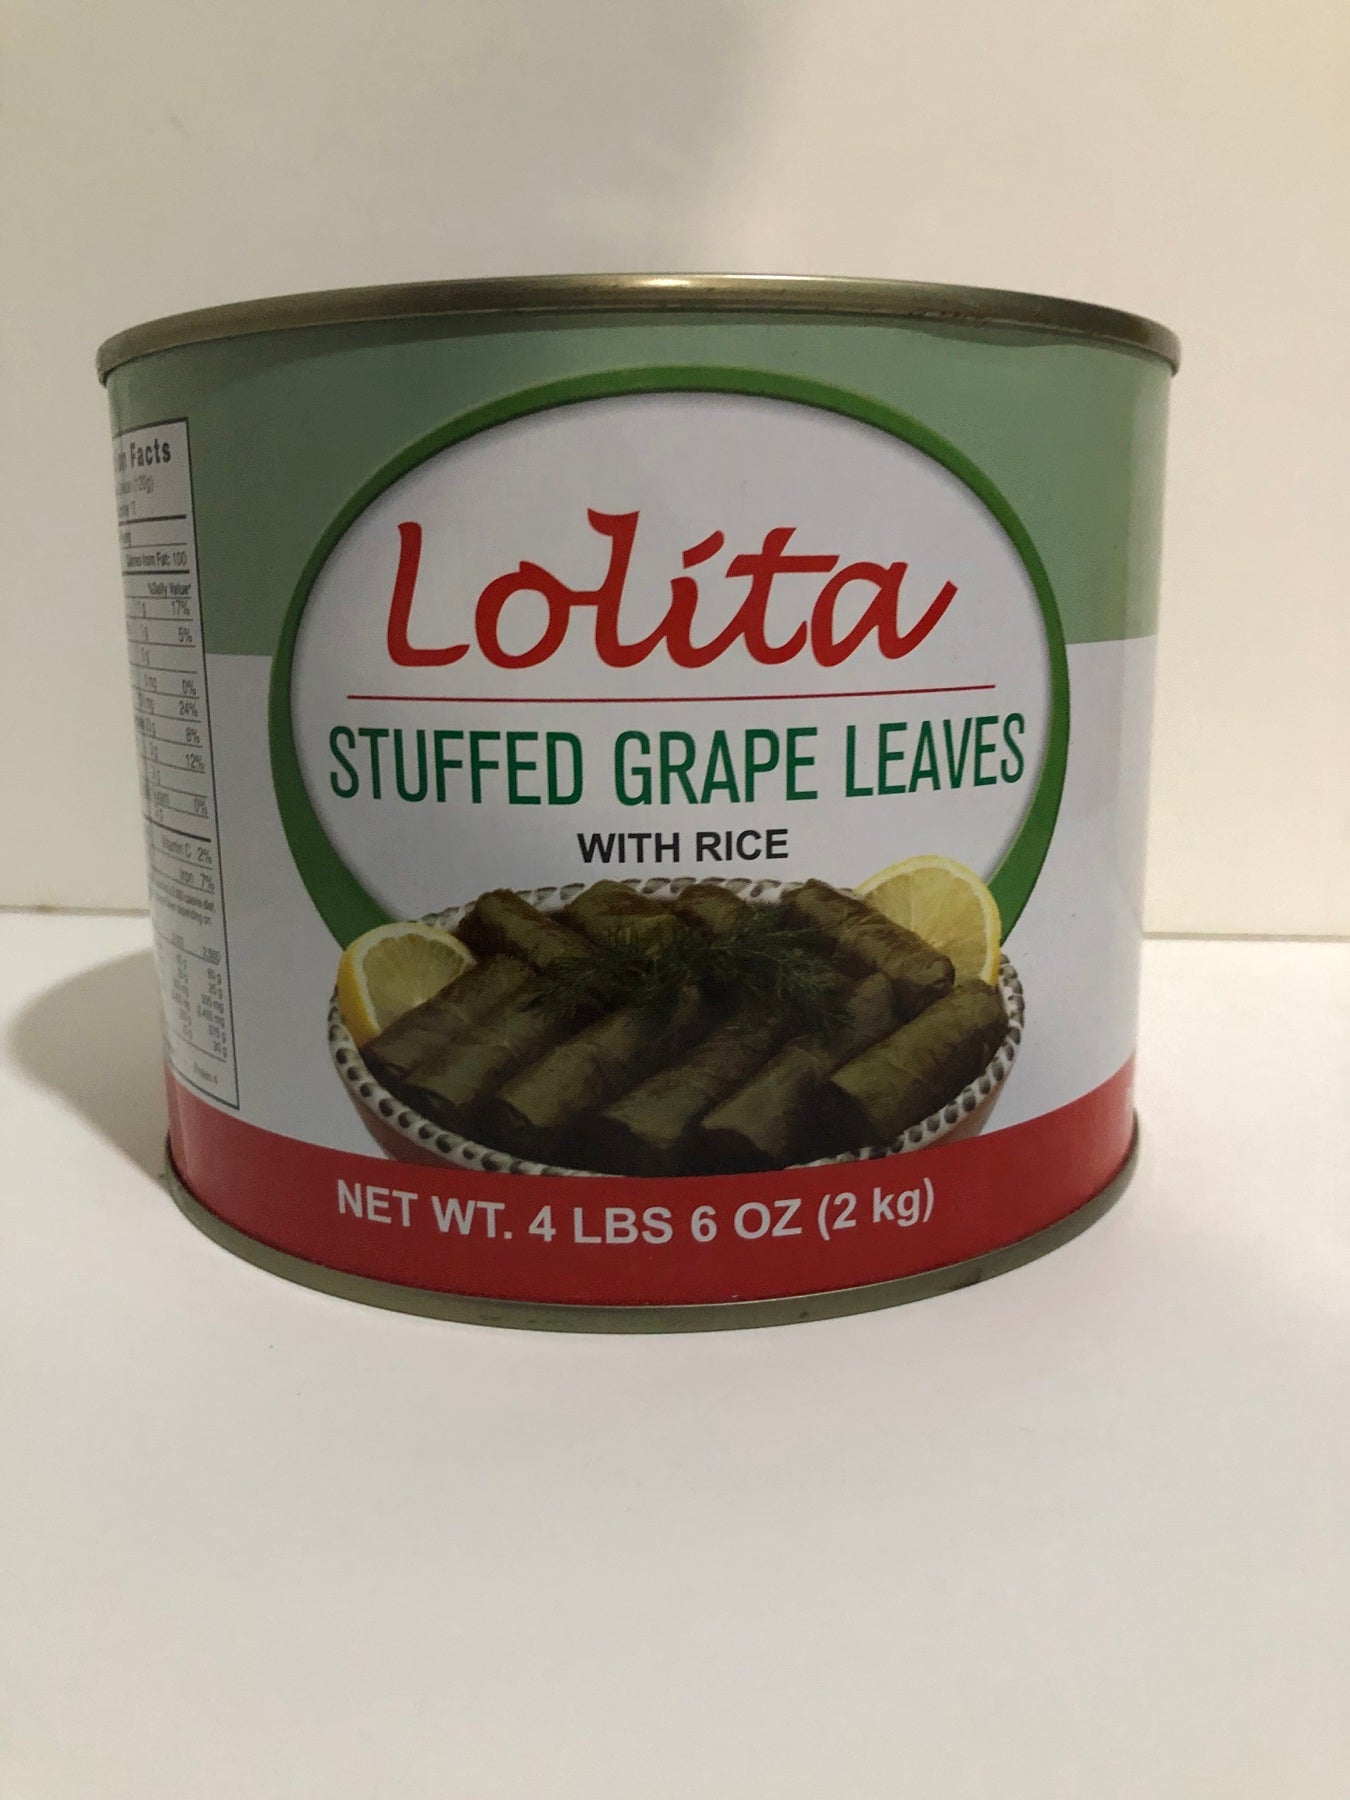 Lolita Stuffed Vine Leaves: Delicious, Nutritious, and Low-Calorie Snack Option  (Dolma),  4 lbs 6 oz (2 kg)